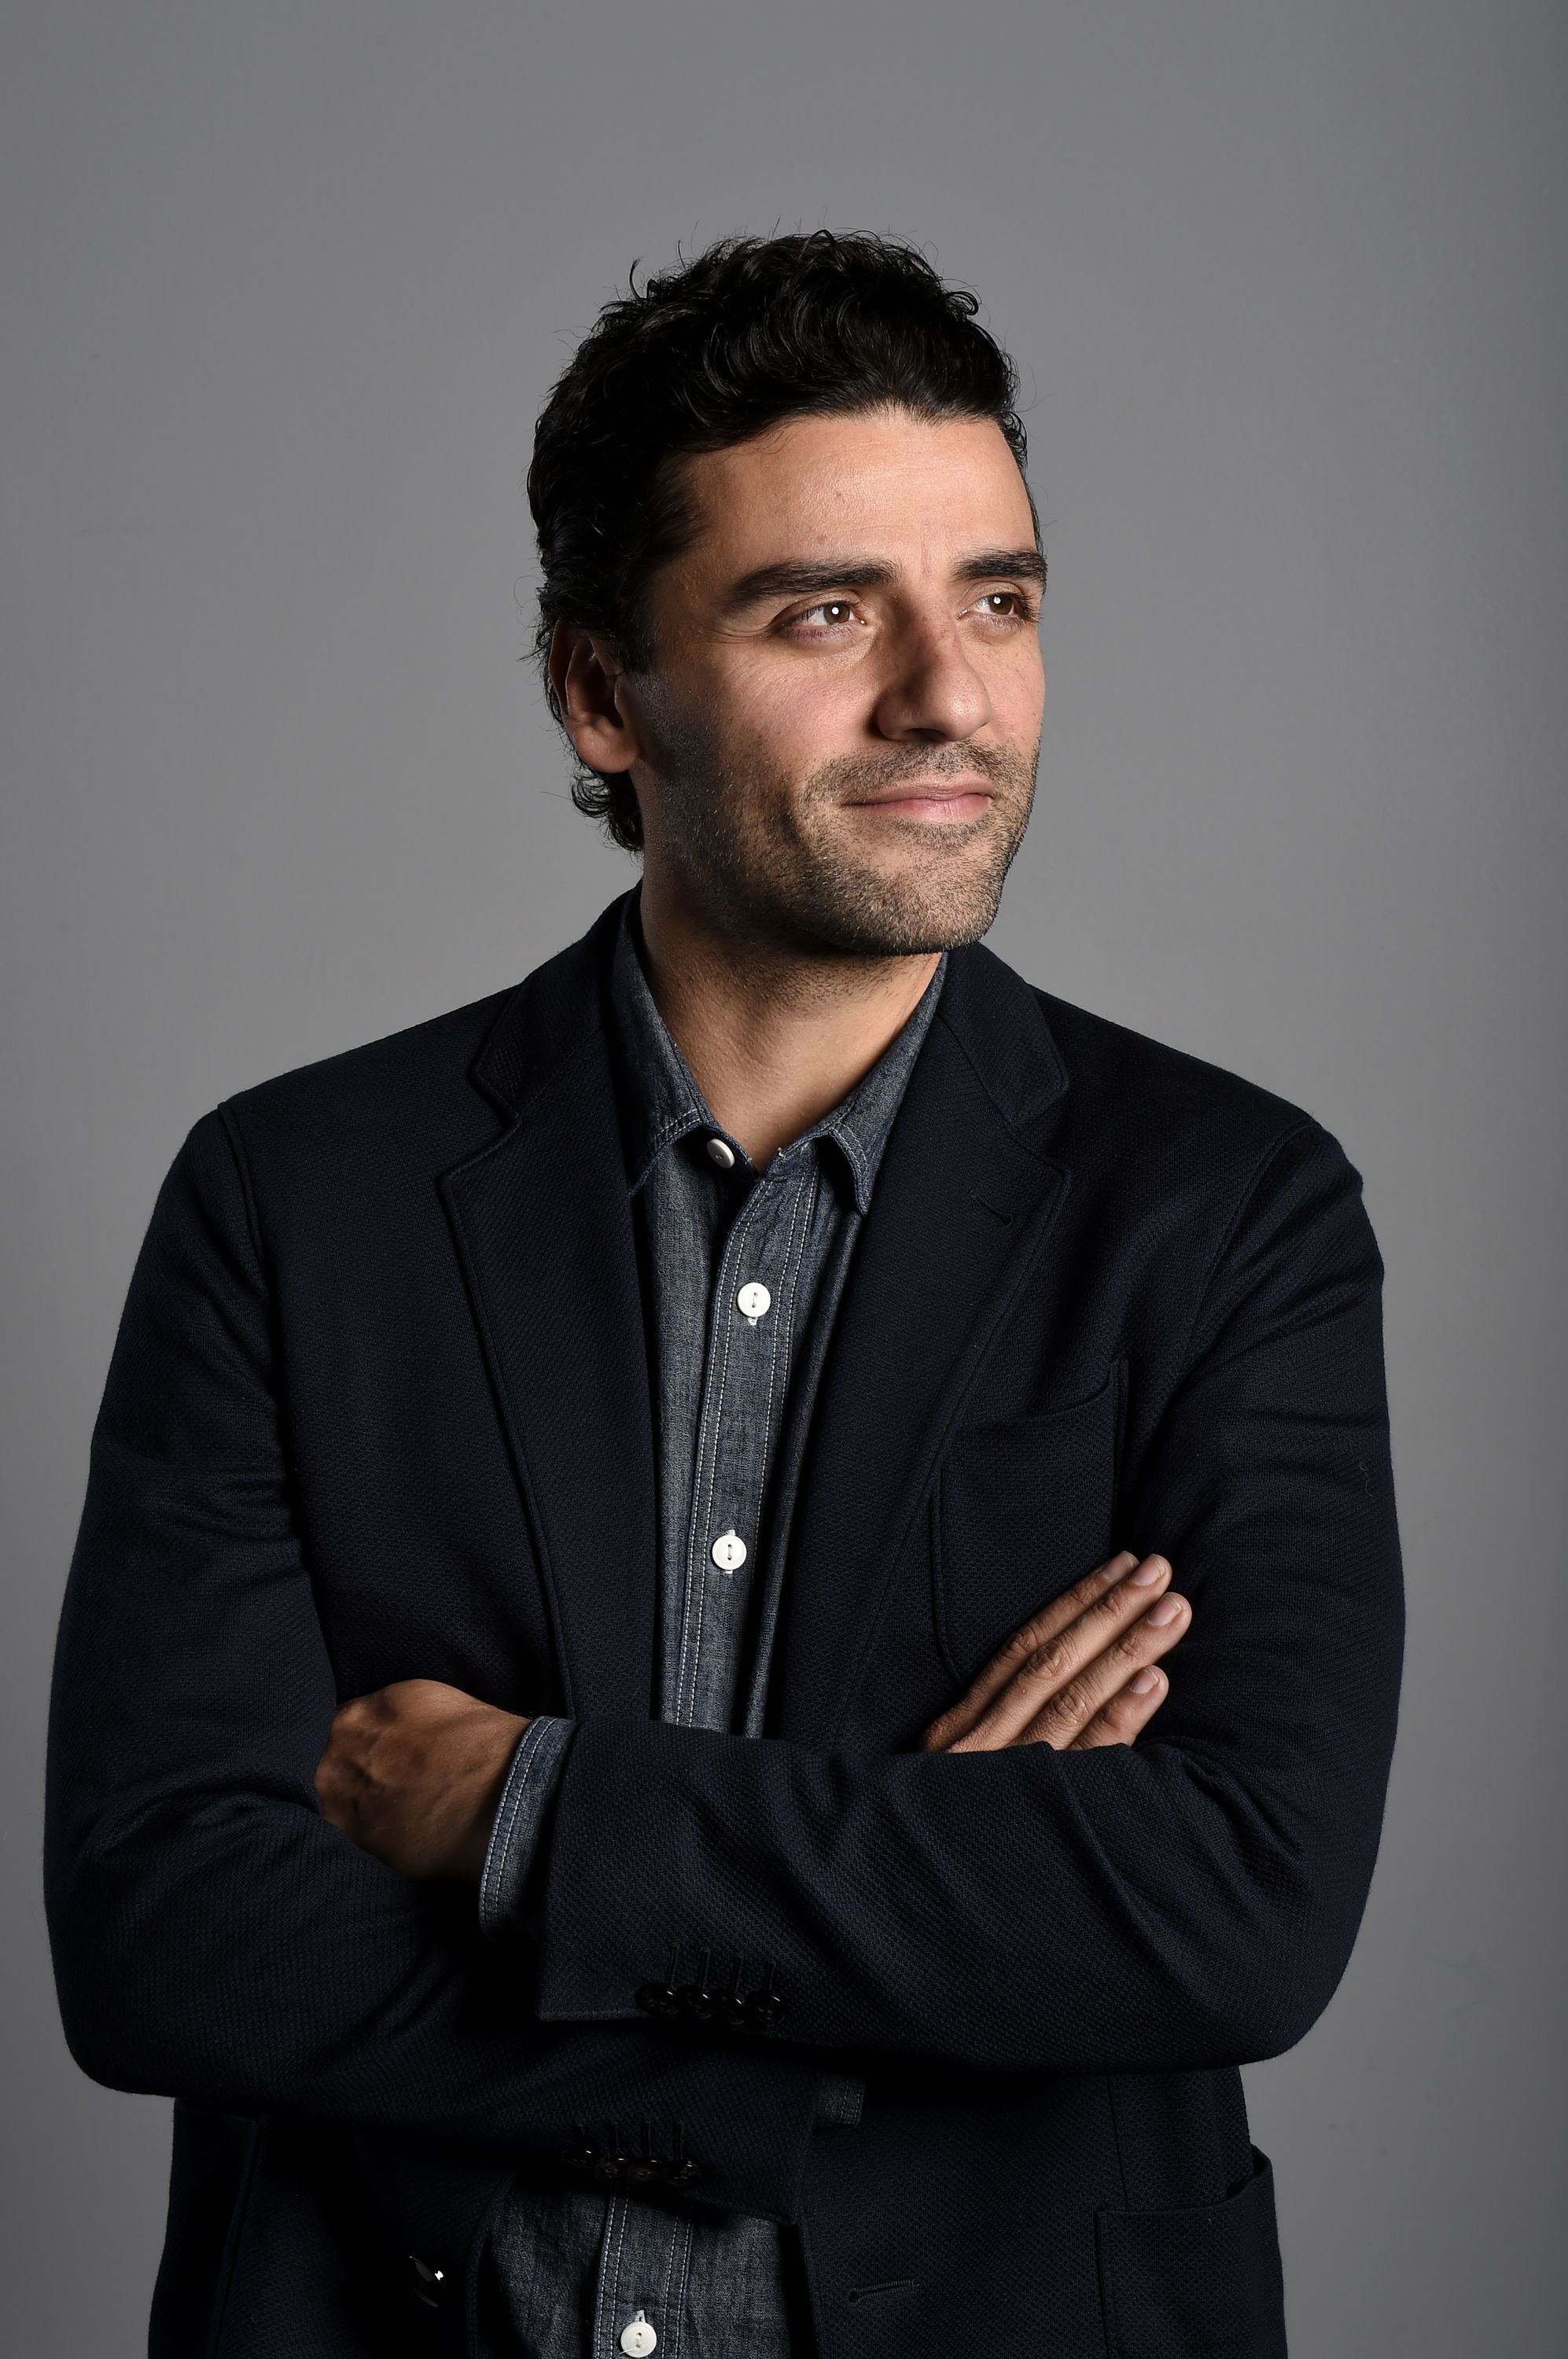 Oscar Isaac, during a promotion for “Star Wars: The Force Awakens,” in Los Angeles. Isaac plays Poe Dameron in the new movie directed by J.J. Abrams, which releases in U.S. theaters on Dec. 18.